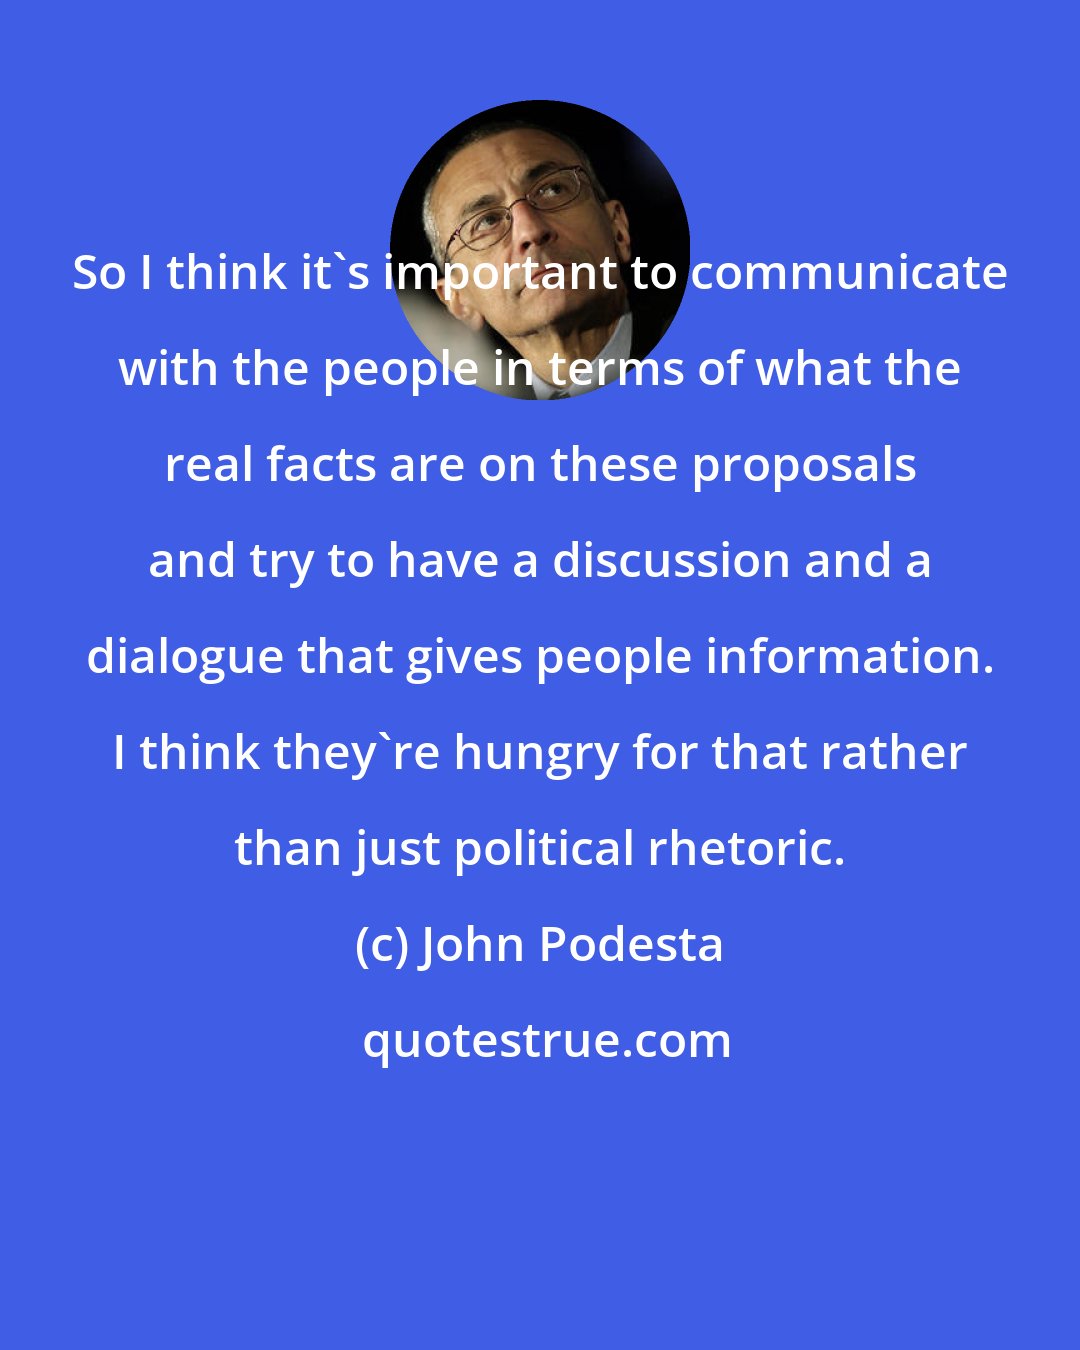 John Podesta: So I think it's important to communicate with the people in terms of what the real facts are on these proposals and try to have a discussion and a dialogue that gives people information. I think they're hungry for that rather than just political rhetoric.